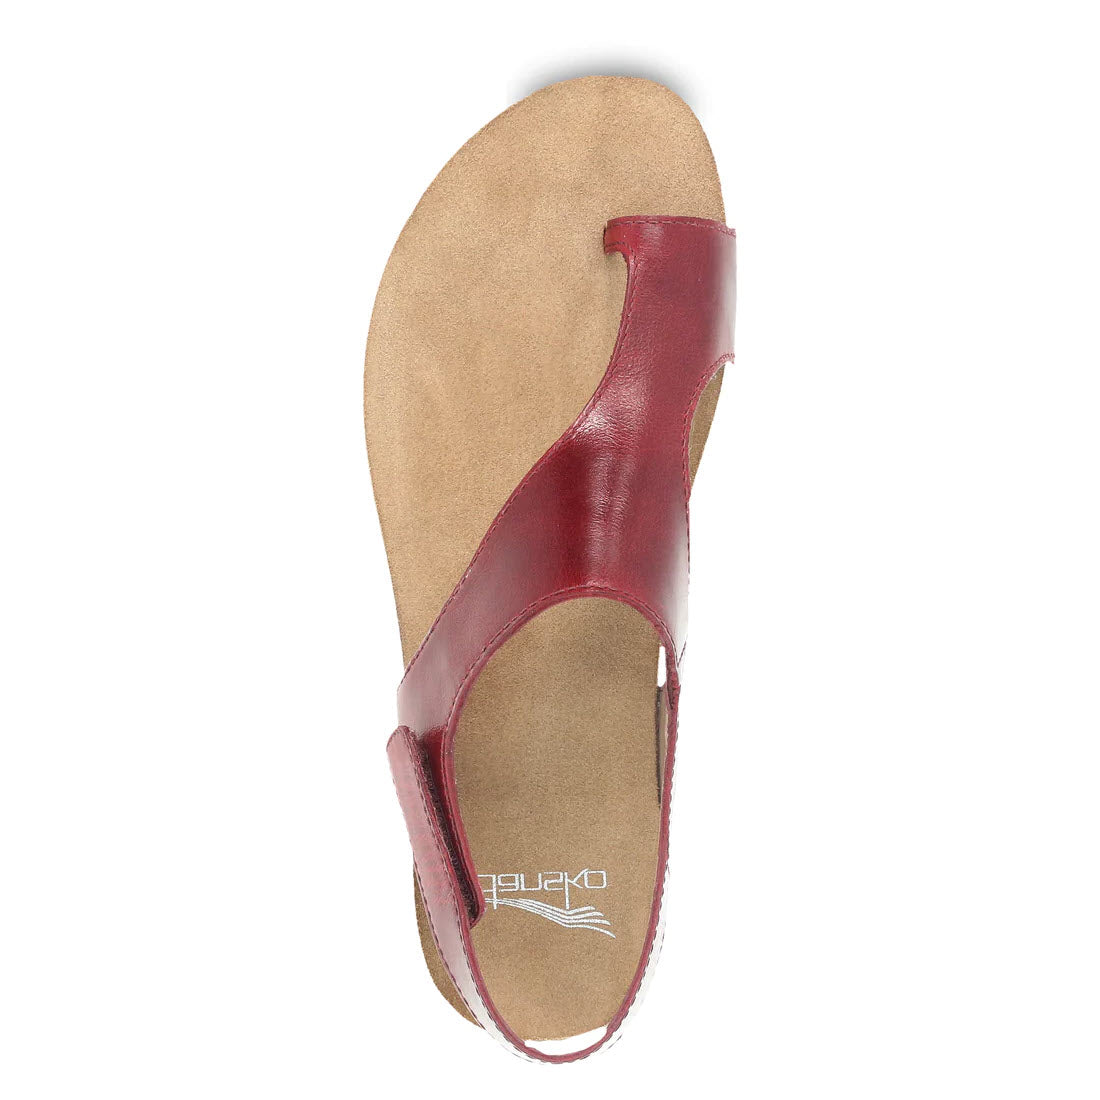 Top-down view of a single Dansko Reece Cinnabar - Womens sandal with a stylish design and strap detail.